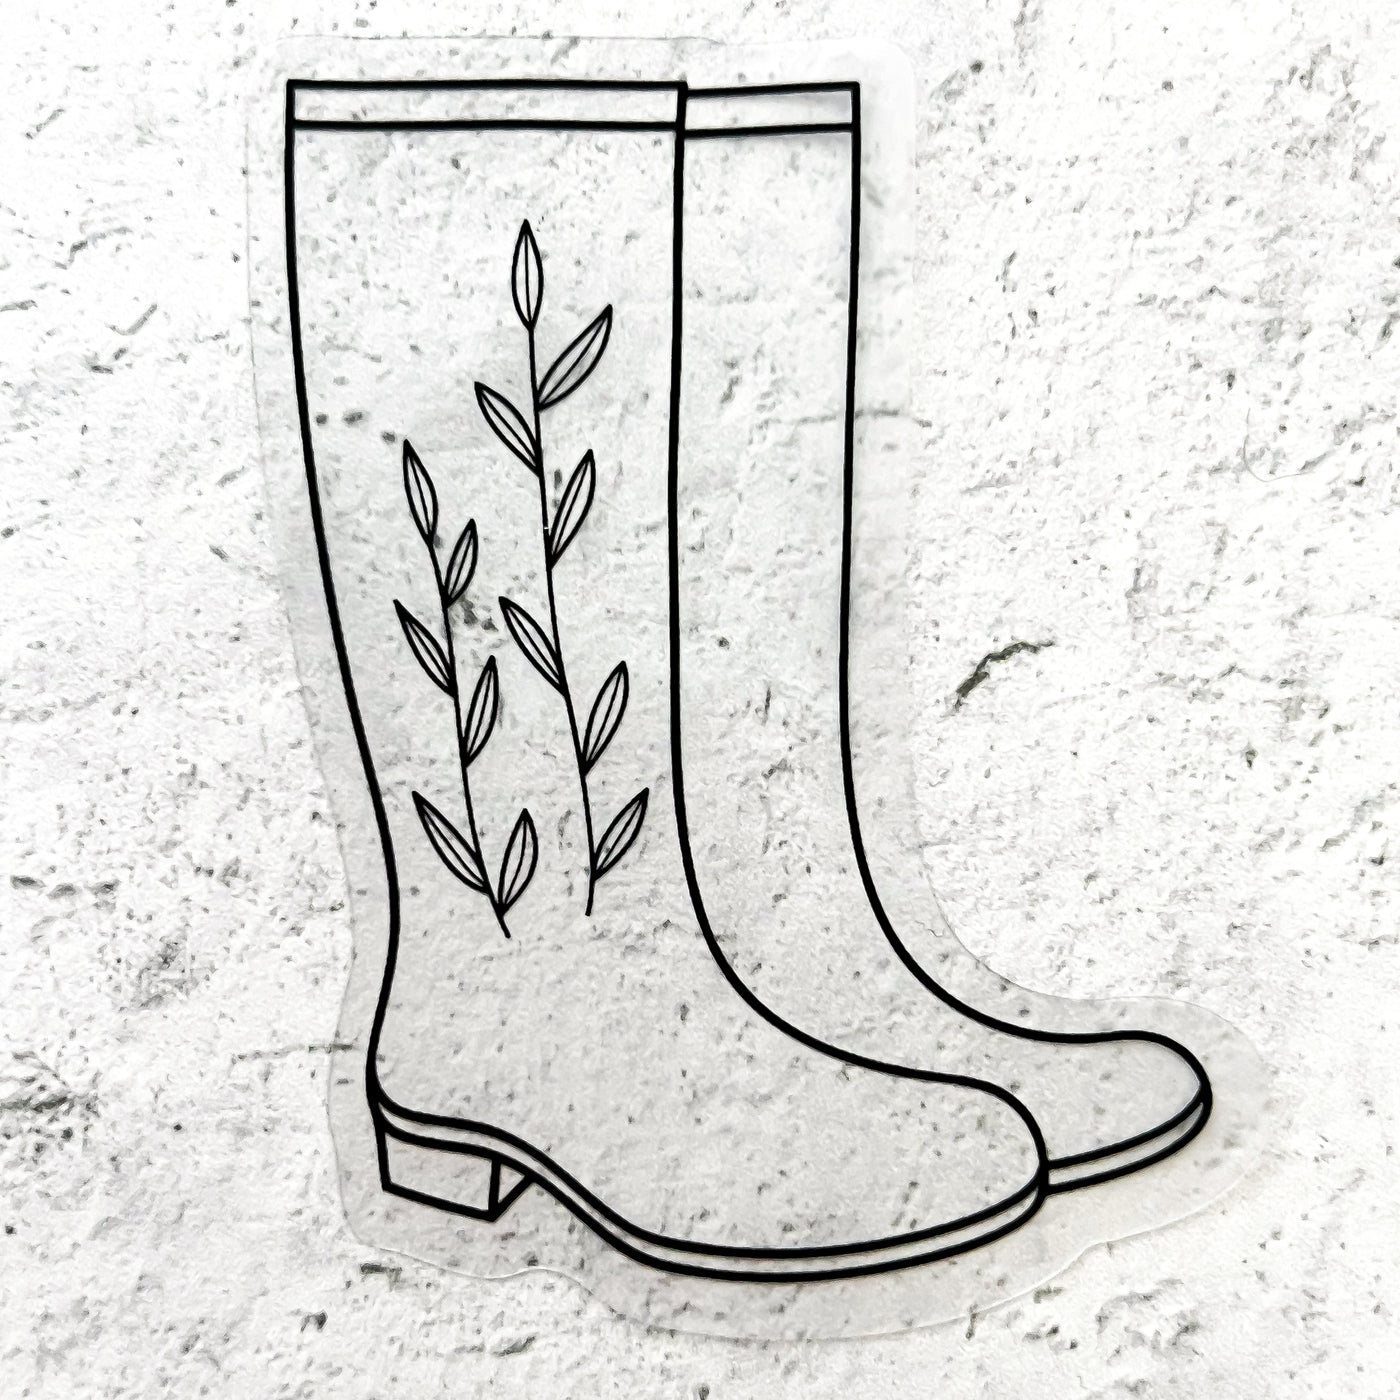 Line drawn boots clear vinyl sticker comes with a solid white backing by Simpliday Paper, Olga Nagorna.